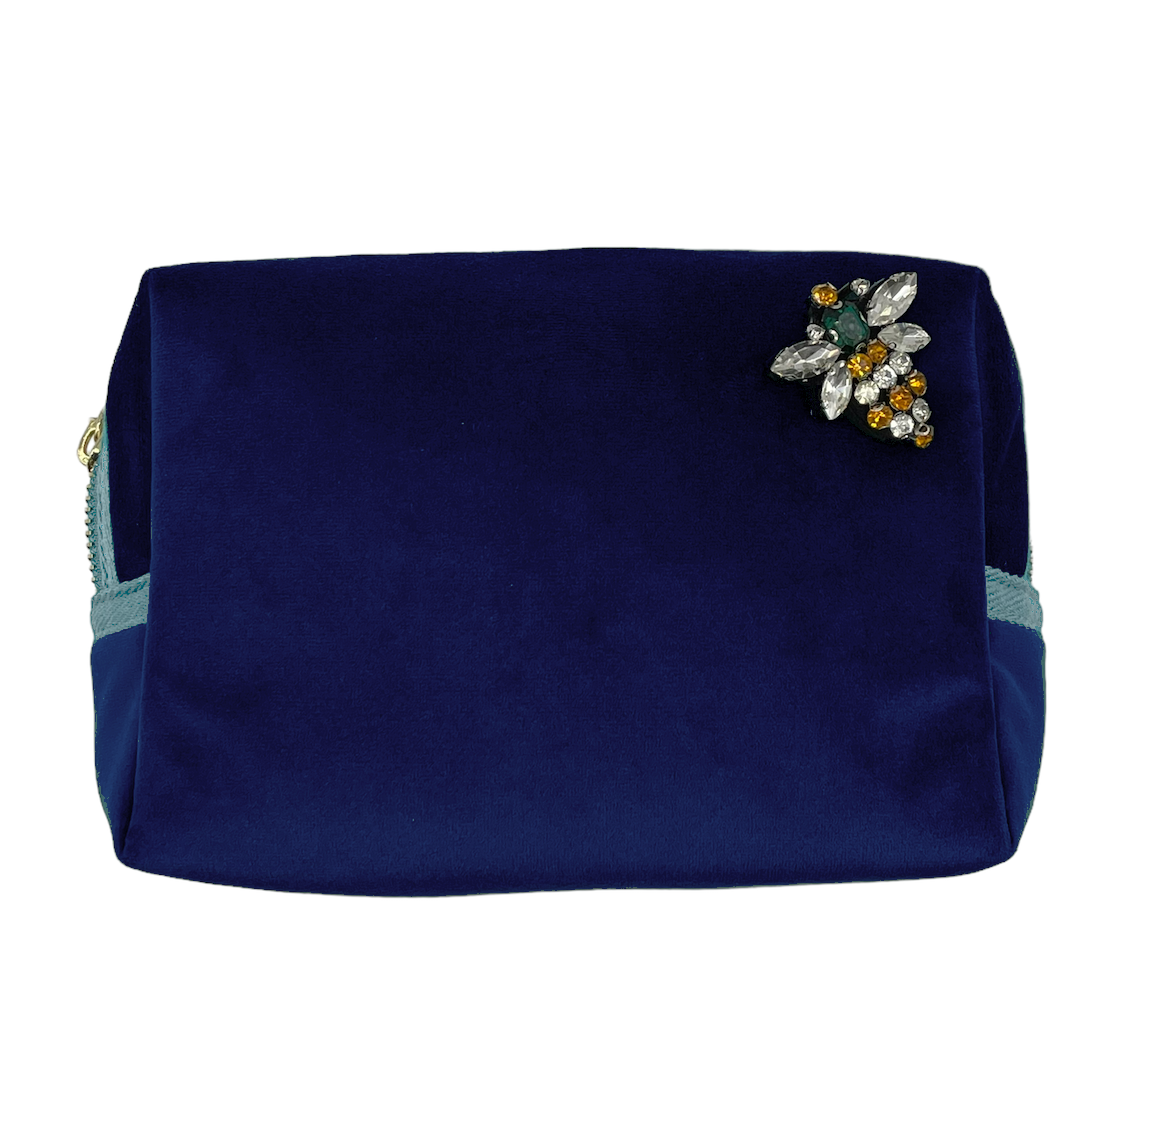 Blue make-up bag & Queen bee pin- recycled velvet